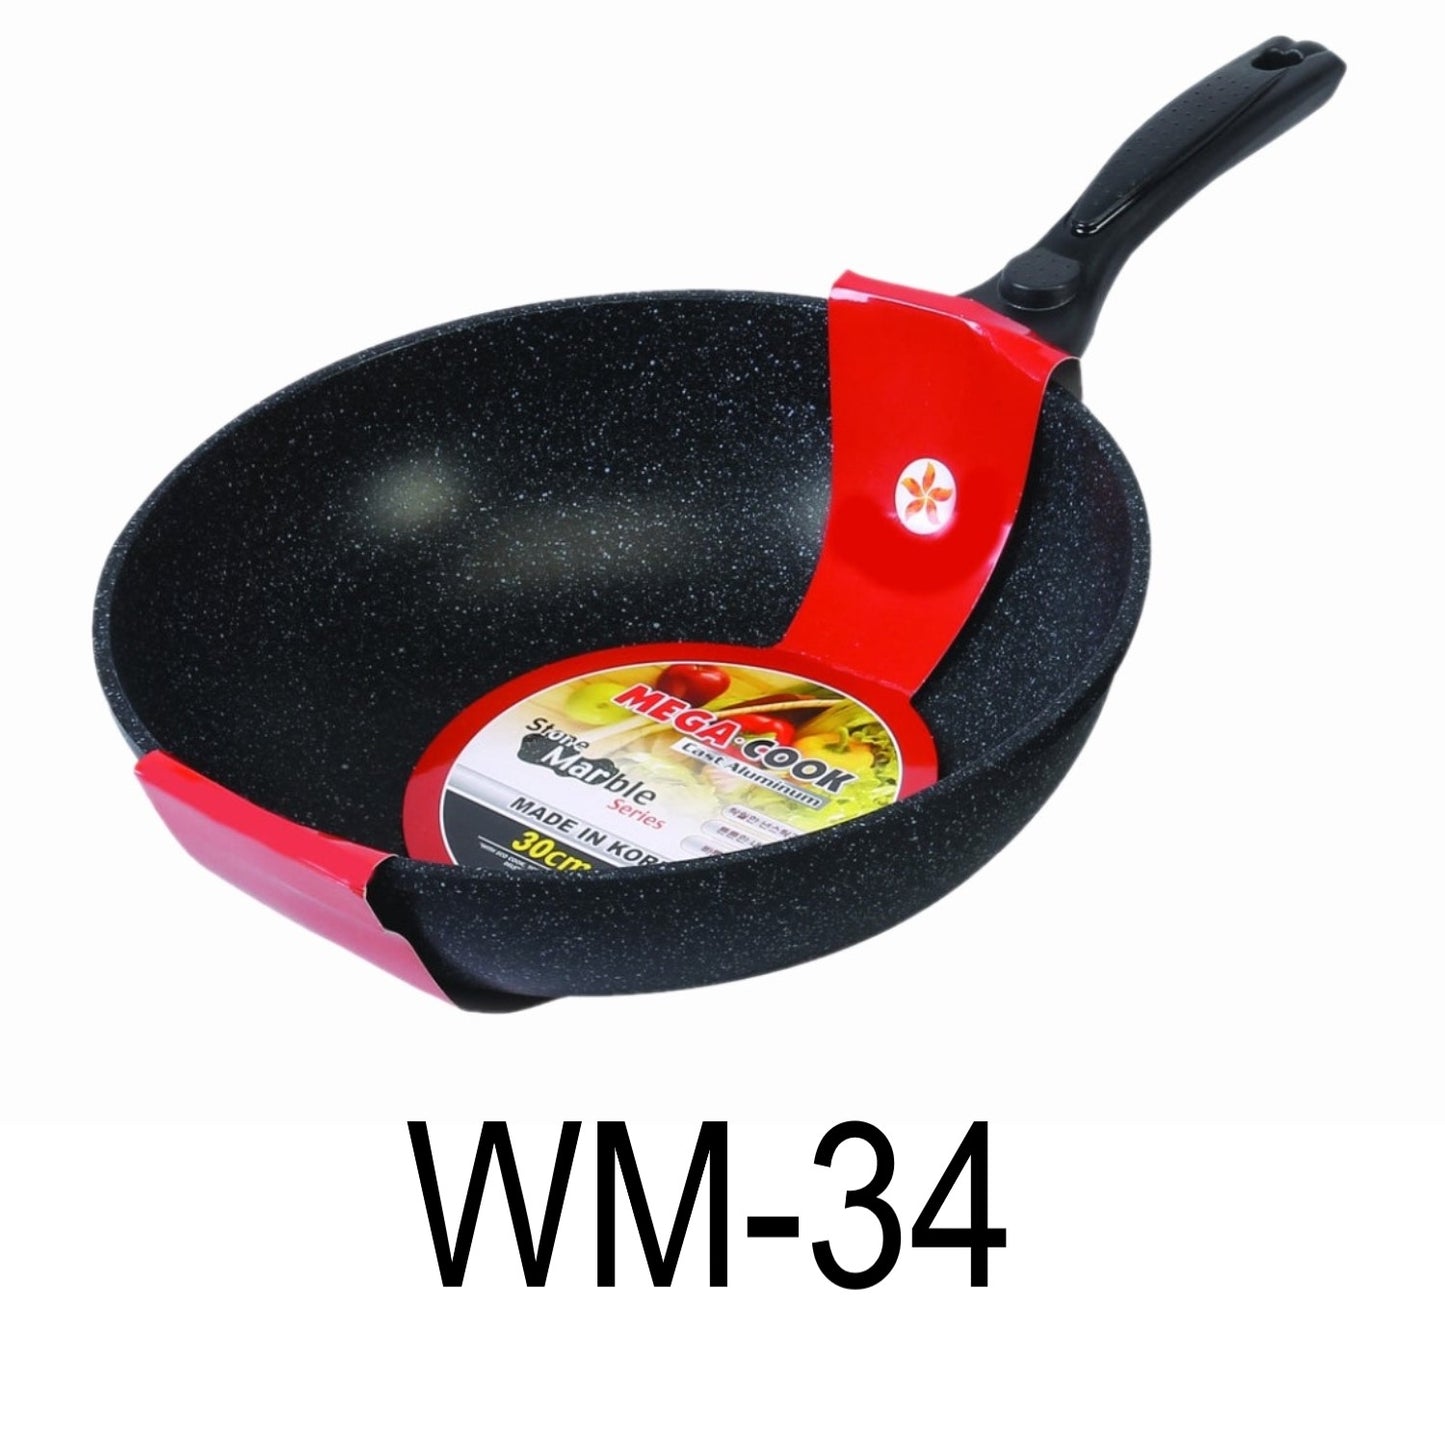 Boutique in the pot Wang Yuanji, household ancient wok cast iron pot, flat  bottom with cedar cover, universal for induction cooker and gas stove,  32/34/36cm